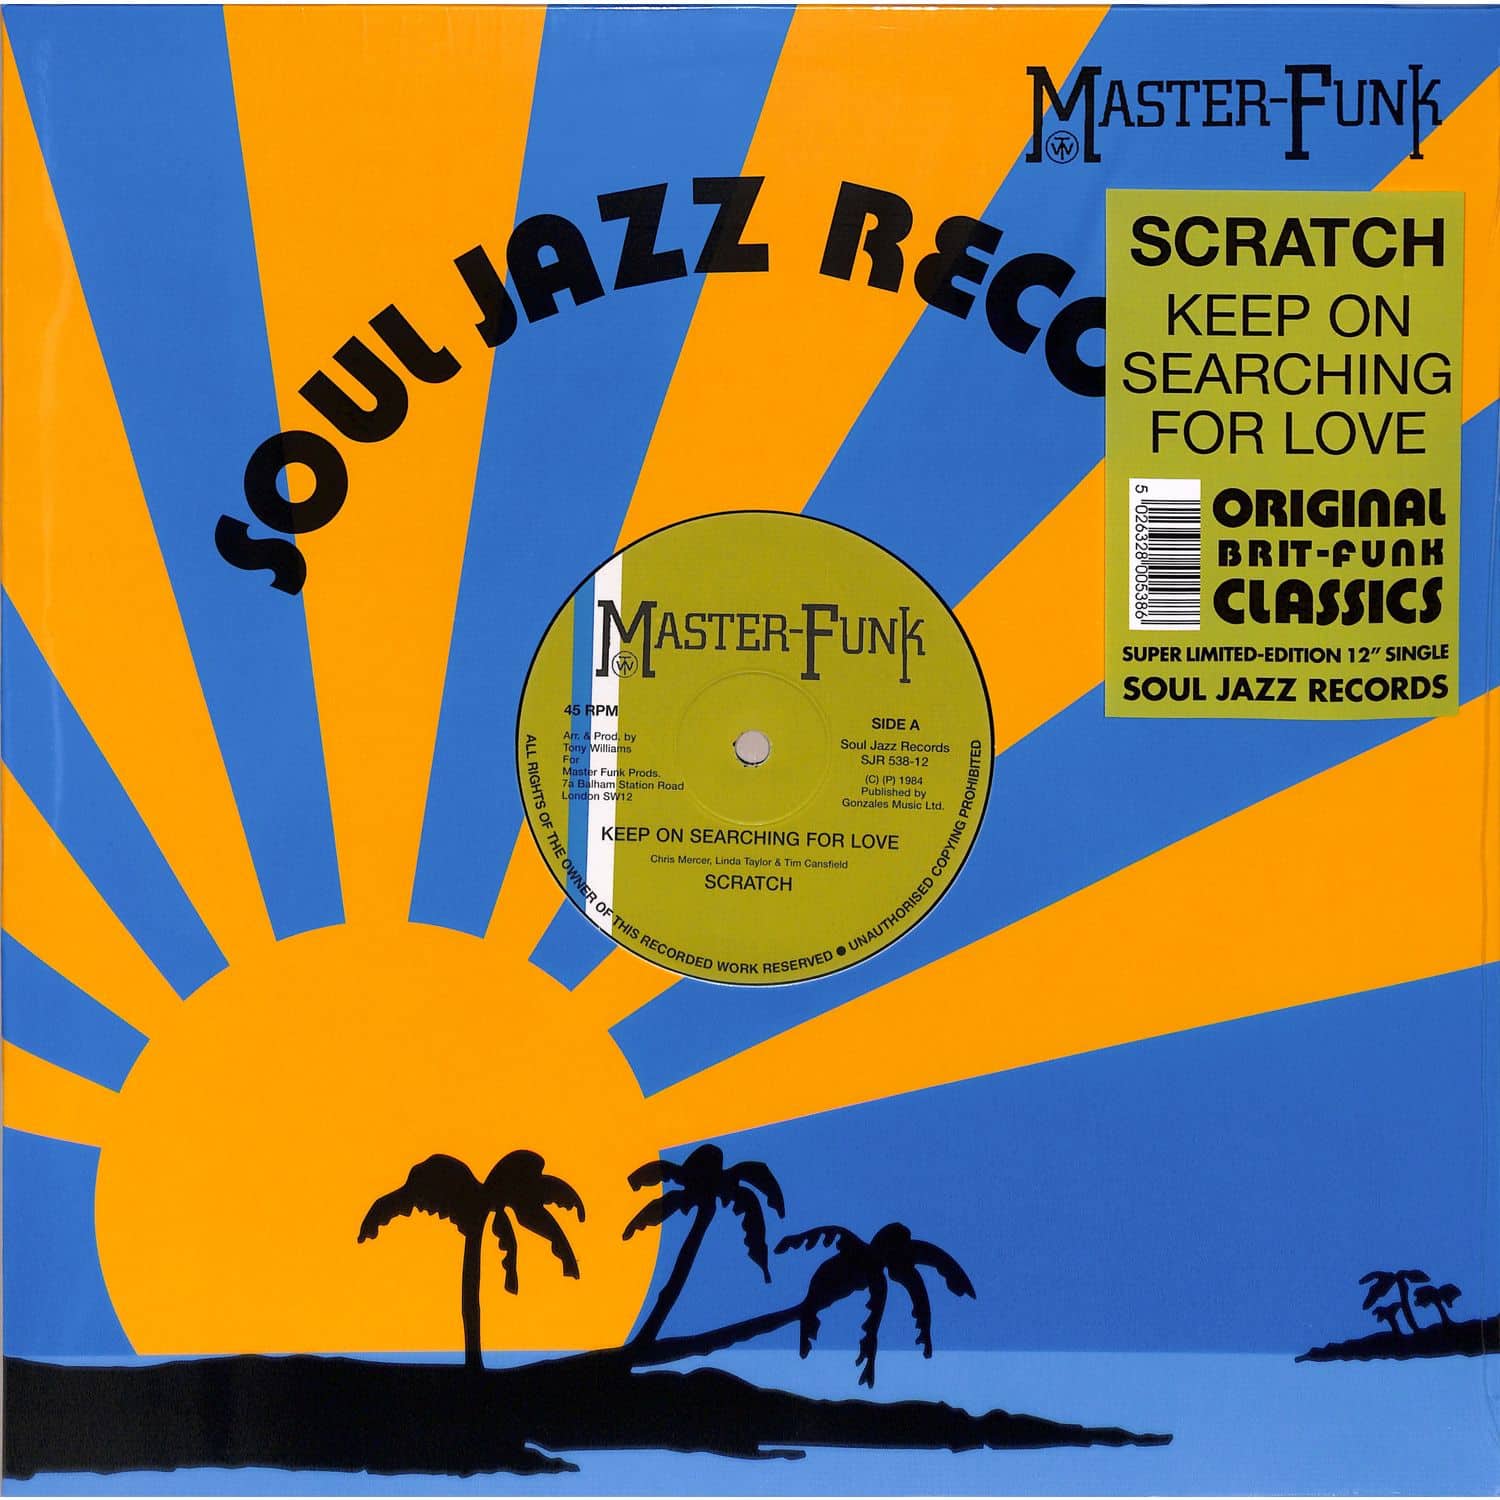 Scratch - KEEP ON SEARCHING FOR LOVE